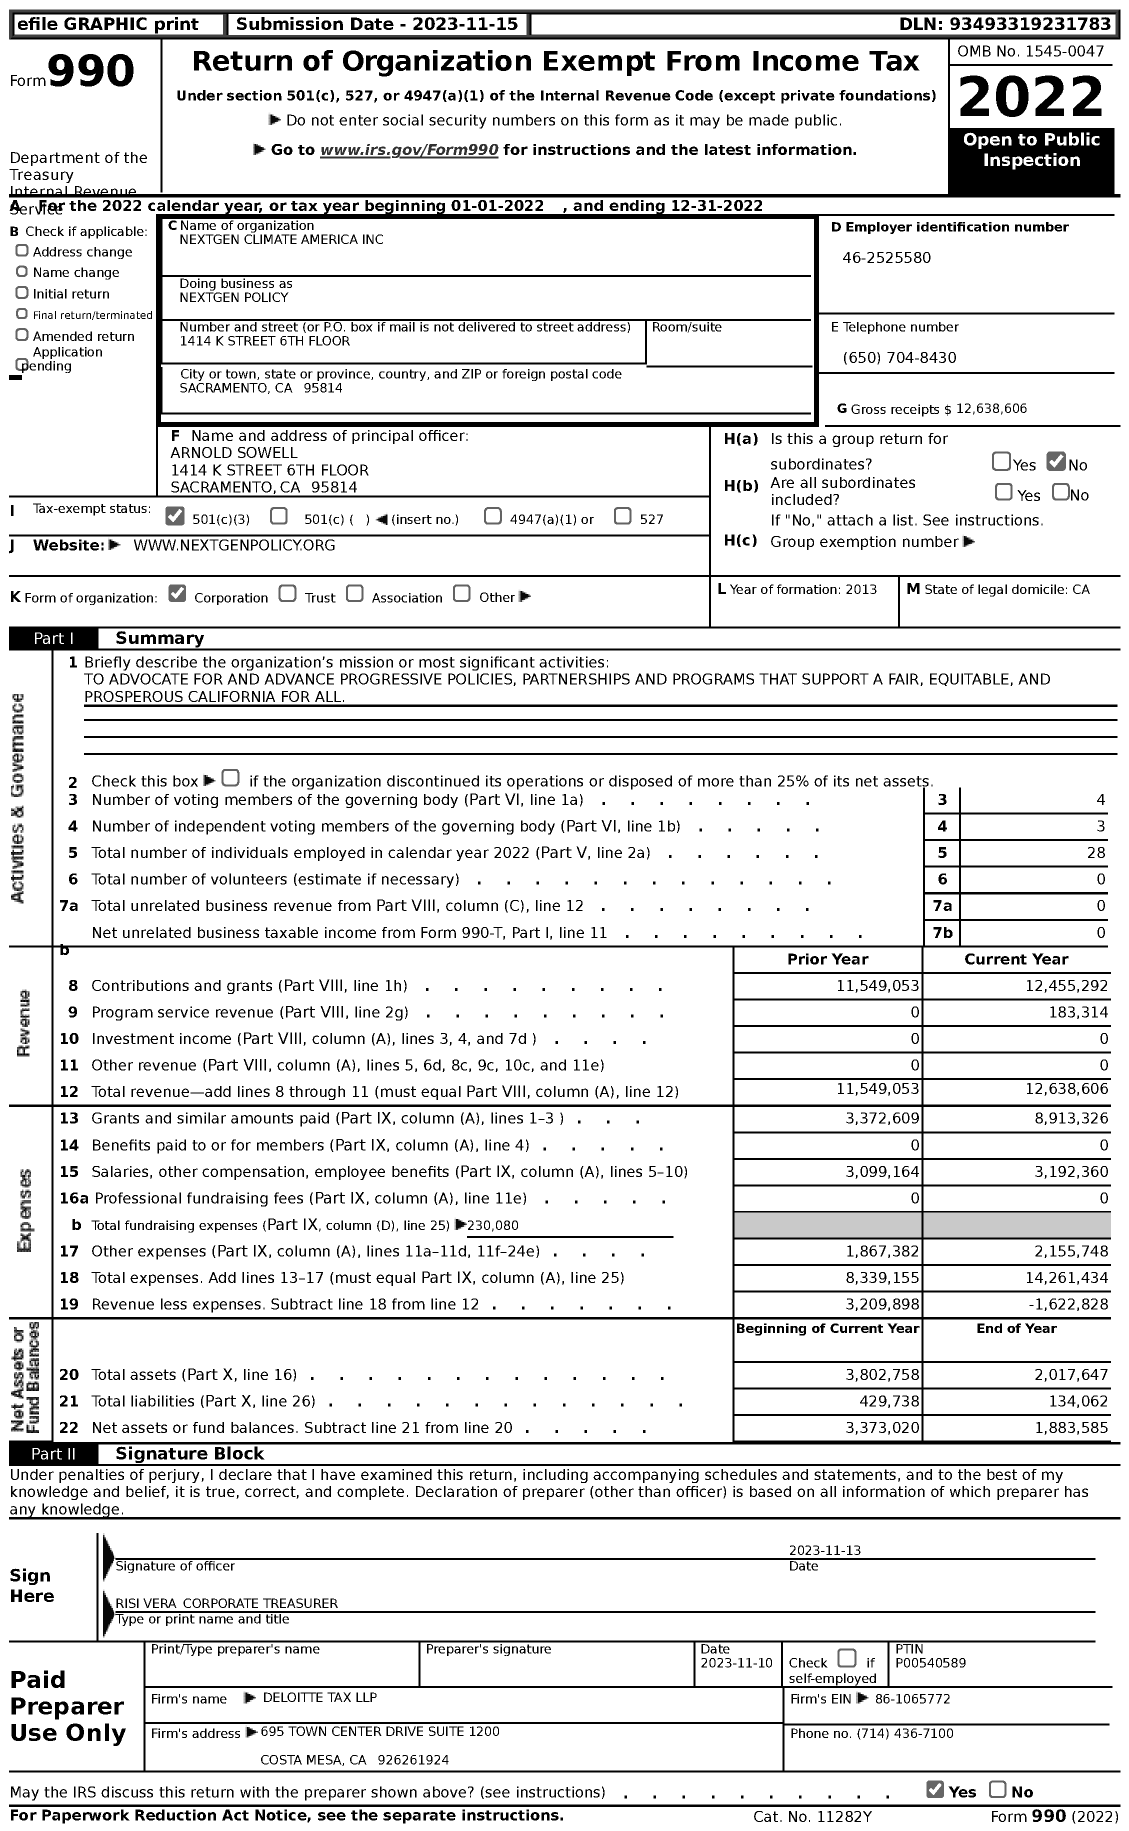 Image of first page of 2022 Form 990 for NextGen Policy